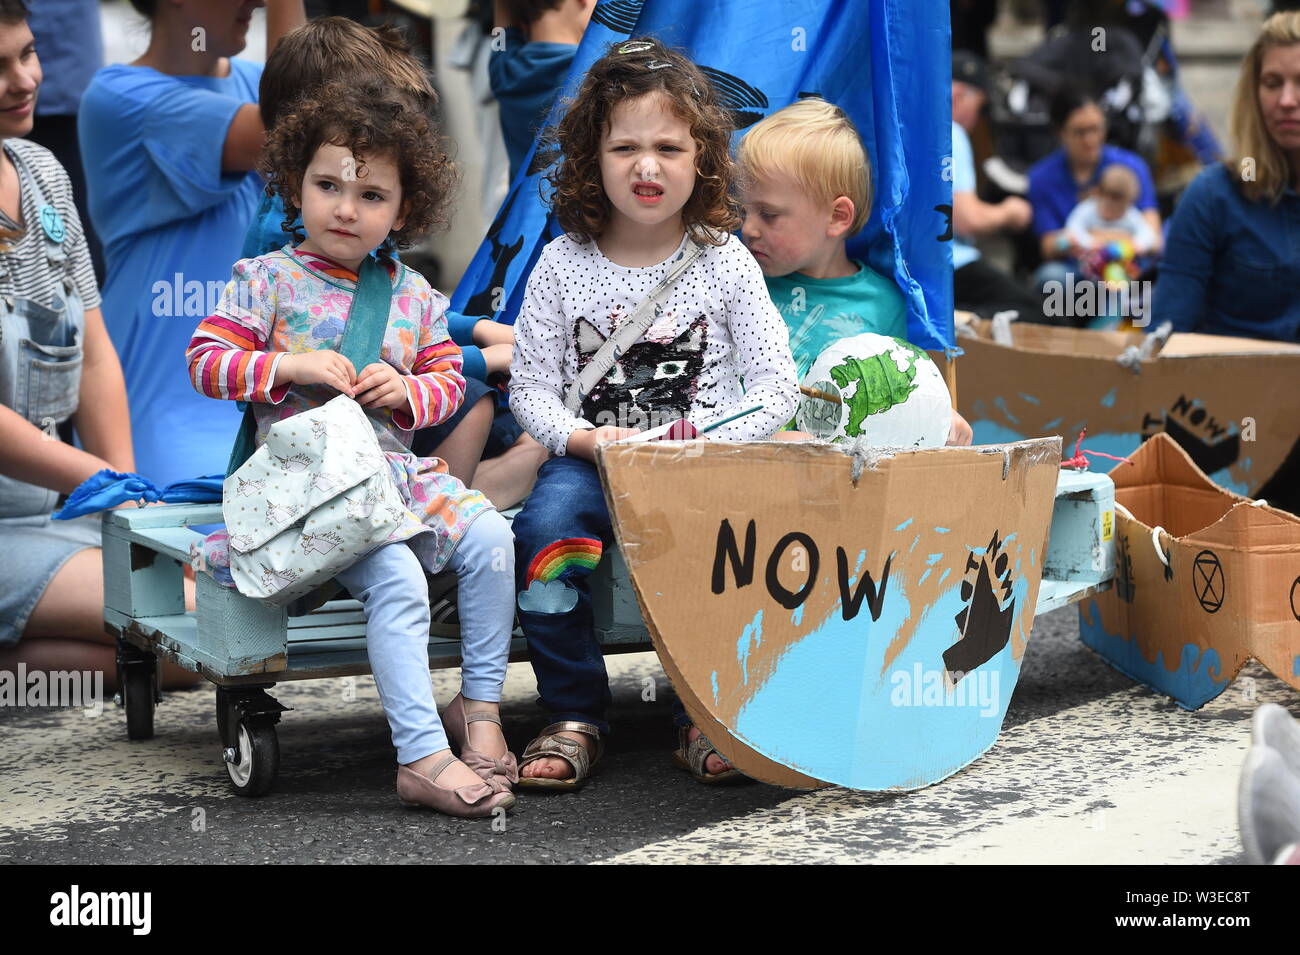 PARENTAL PERMISSION GIVEN Protesters from Extinction Rebellion outside the Royal Courts of Justice in London. Stock Photo